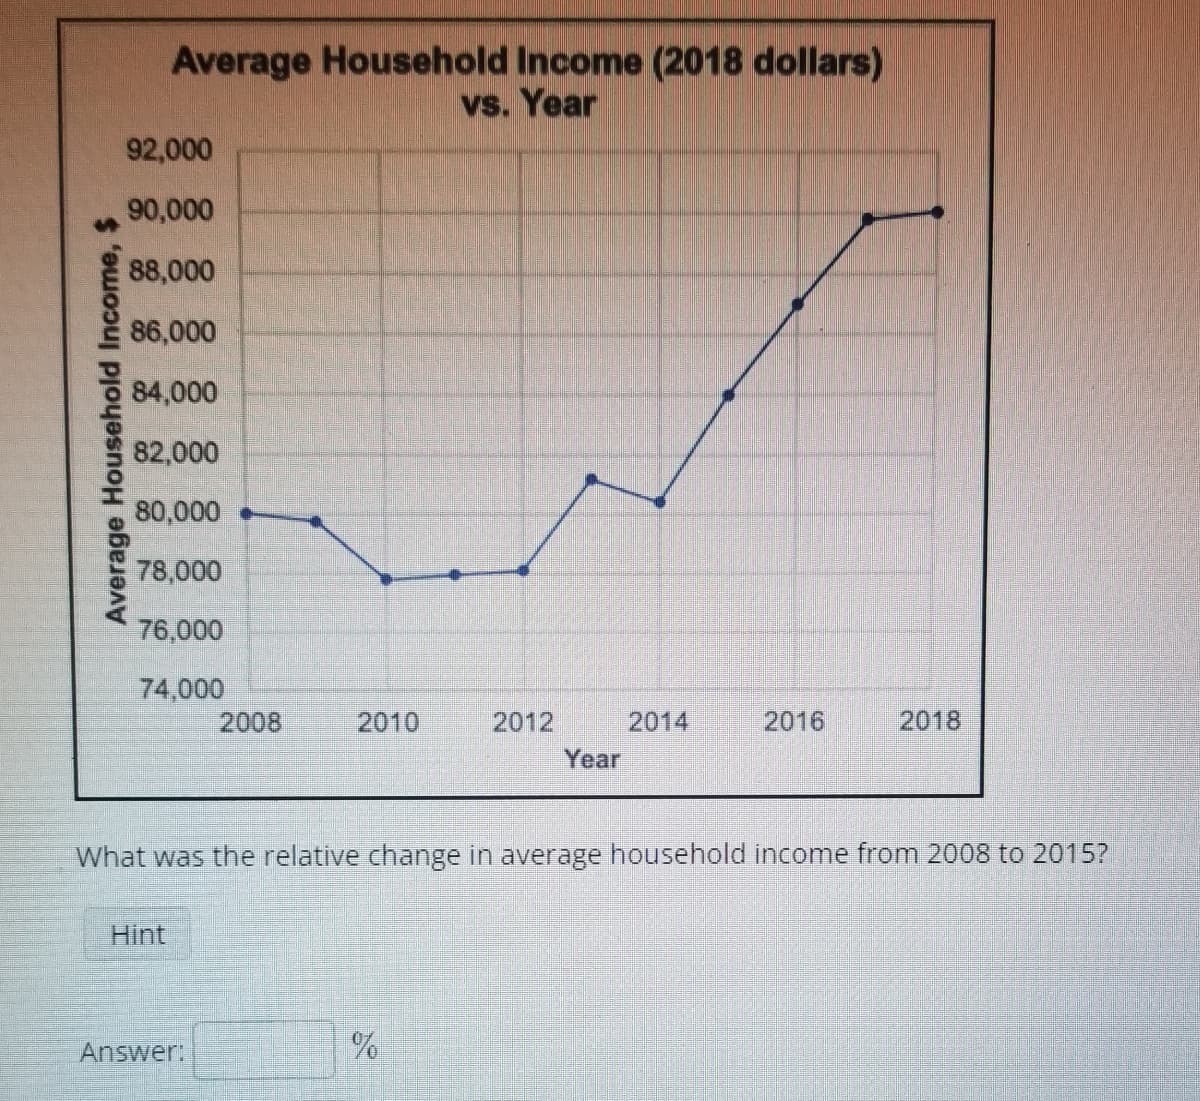 Average Household Income, $
Average Household Income (2018 dollars)
vs. Year
92,000
90,000
88,000
86,000
84,000
82,000
80,000
78,000
76,000
74,000
Hint
2008
Answer:
2010
2012
%
Year
2014
What was the relative change in average household income from 2008 to 2015?
2016
2018